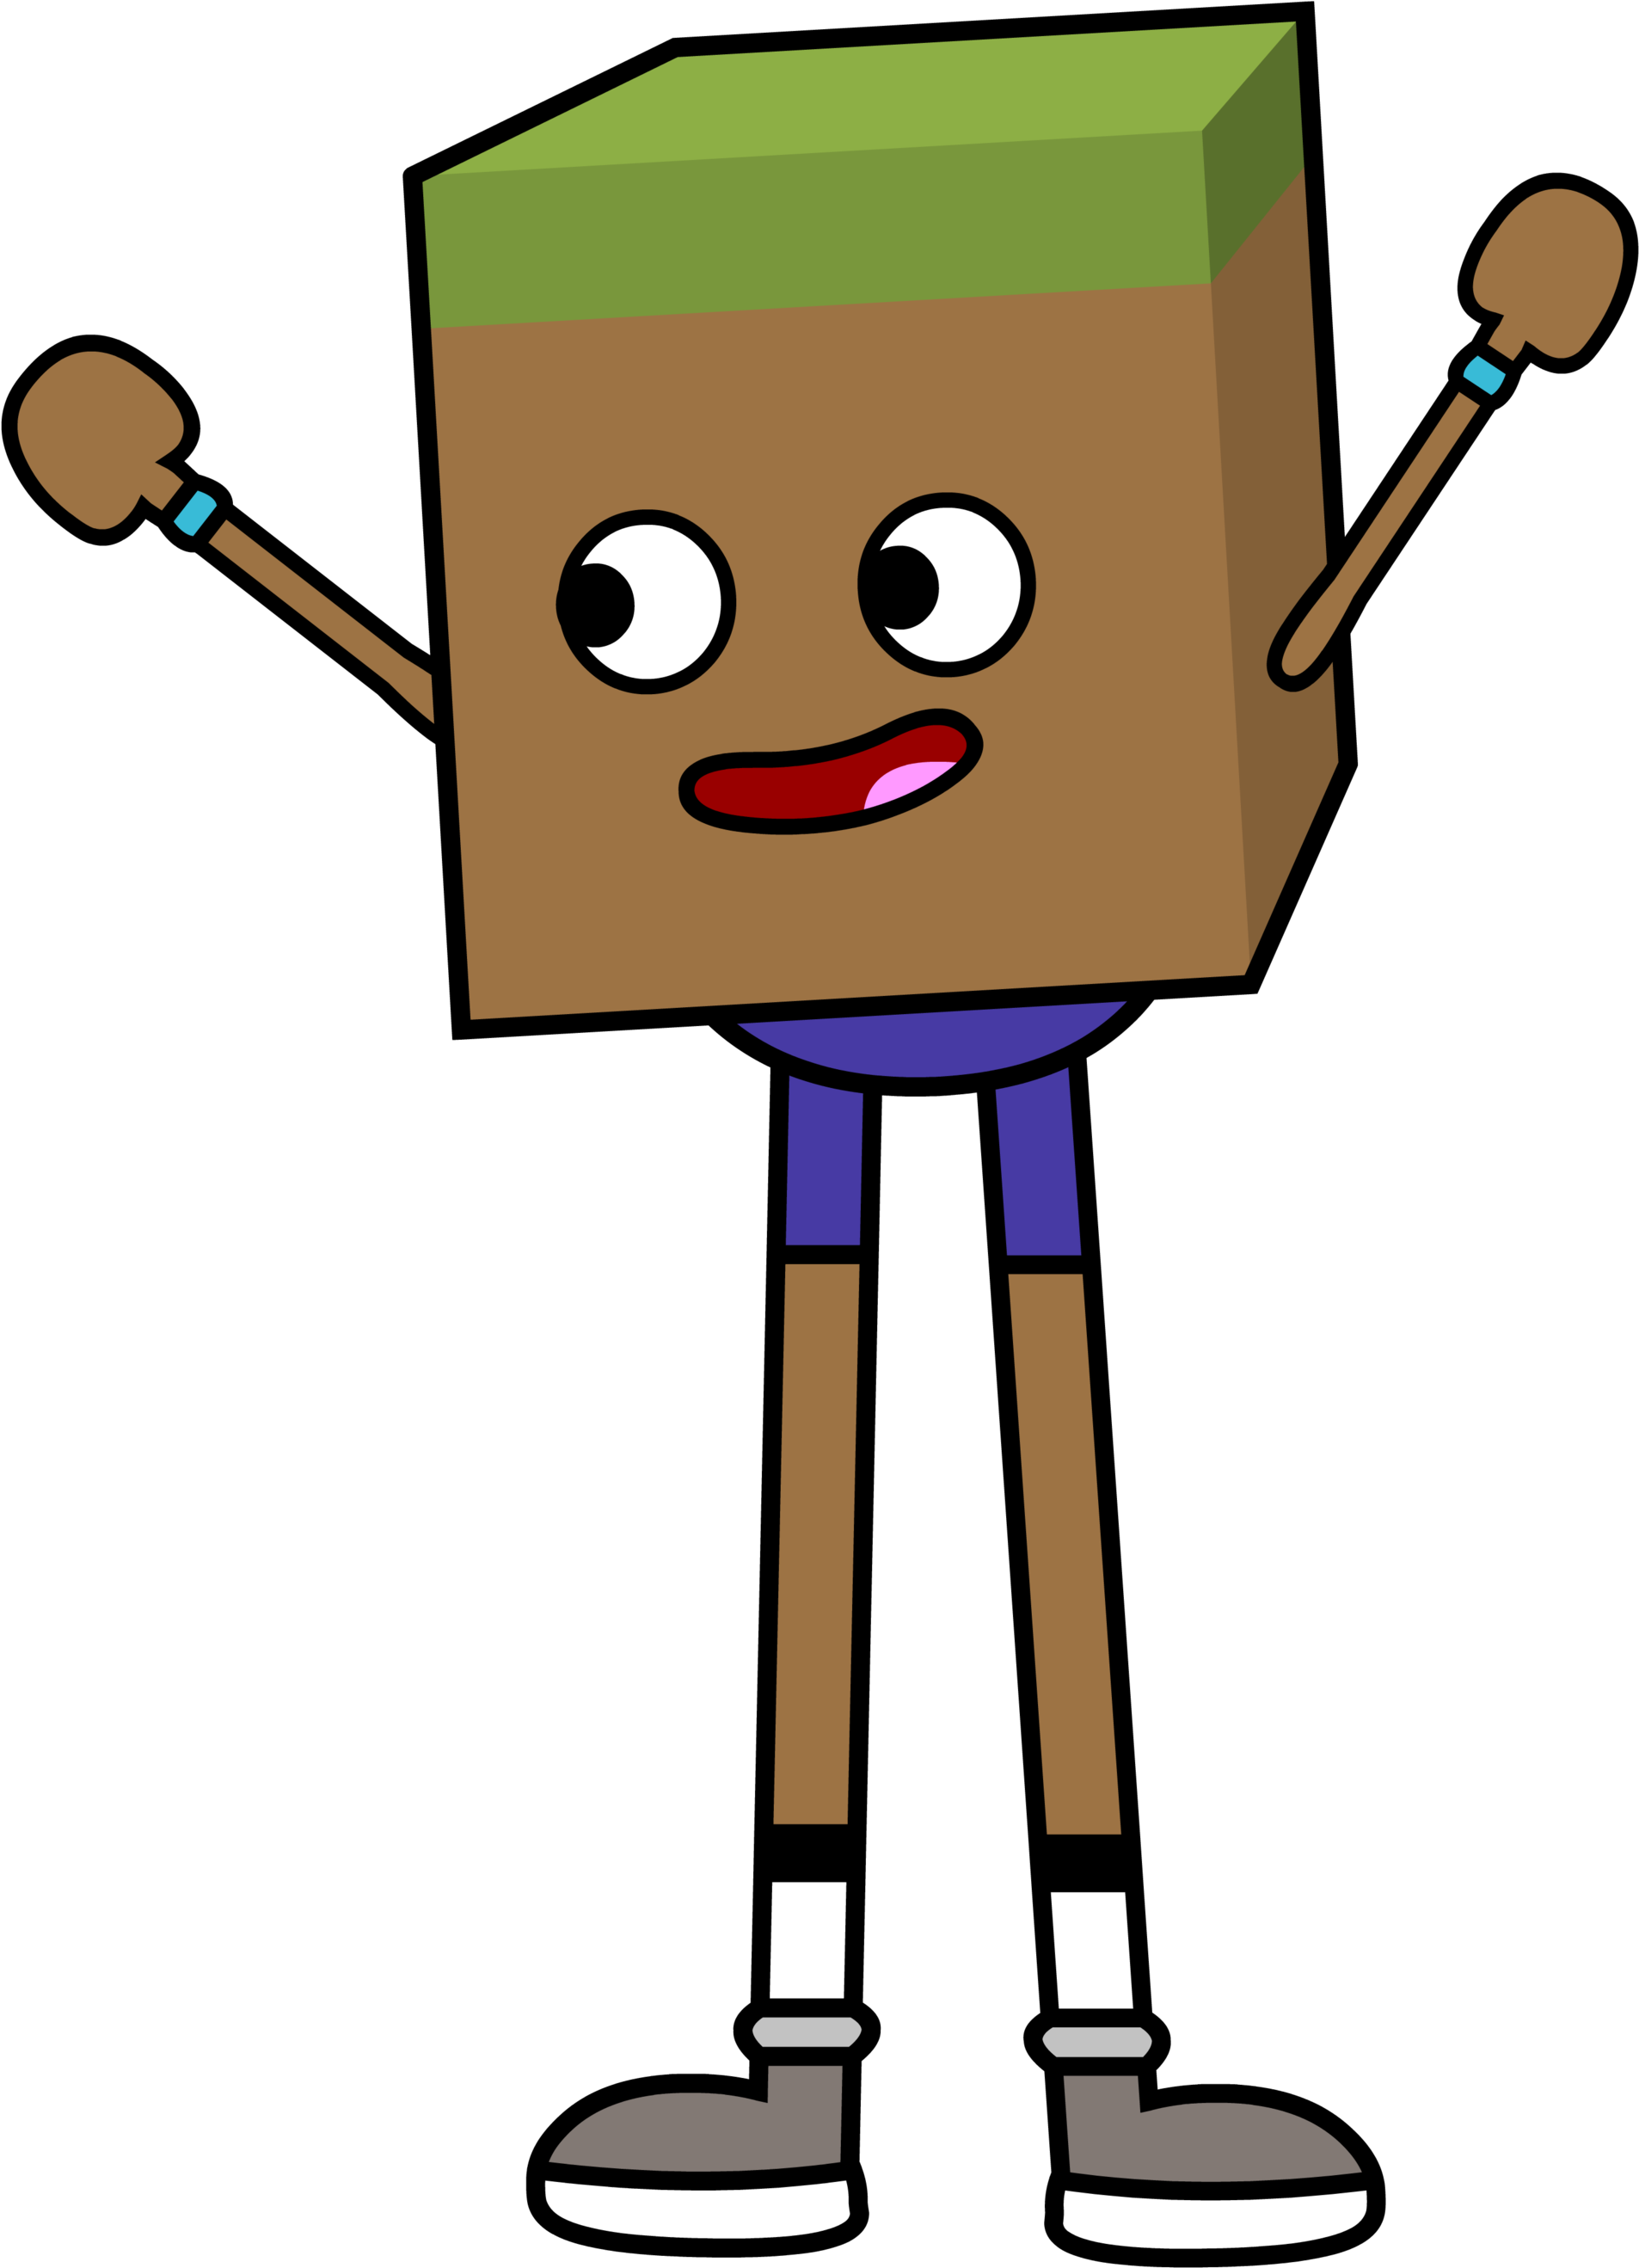 A Cartoon Of A Square Box With Arms Up